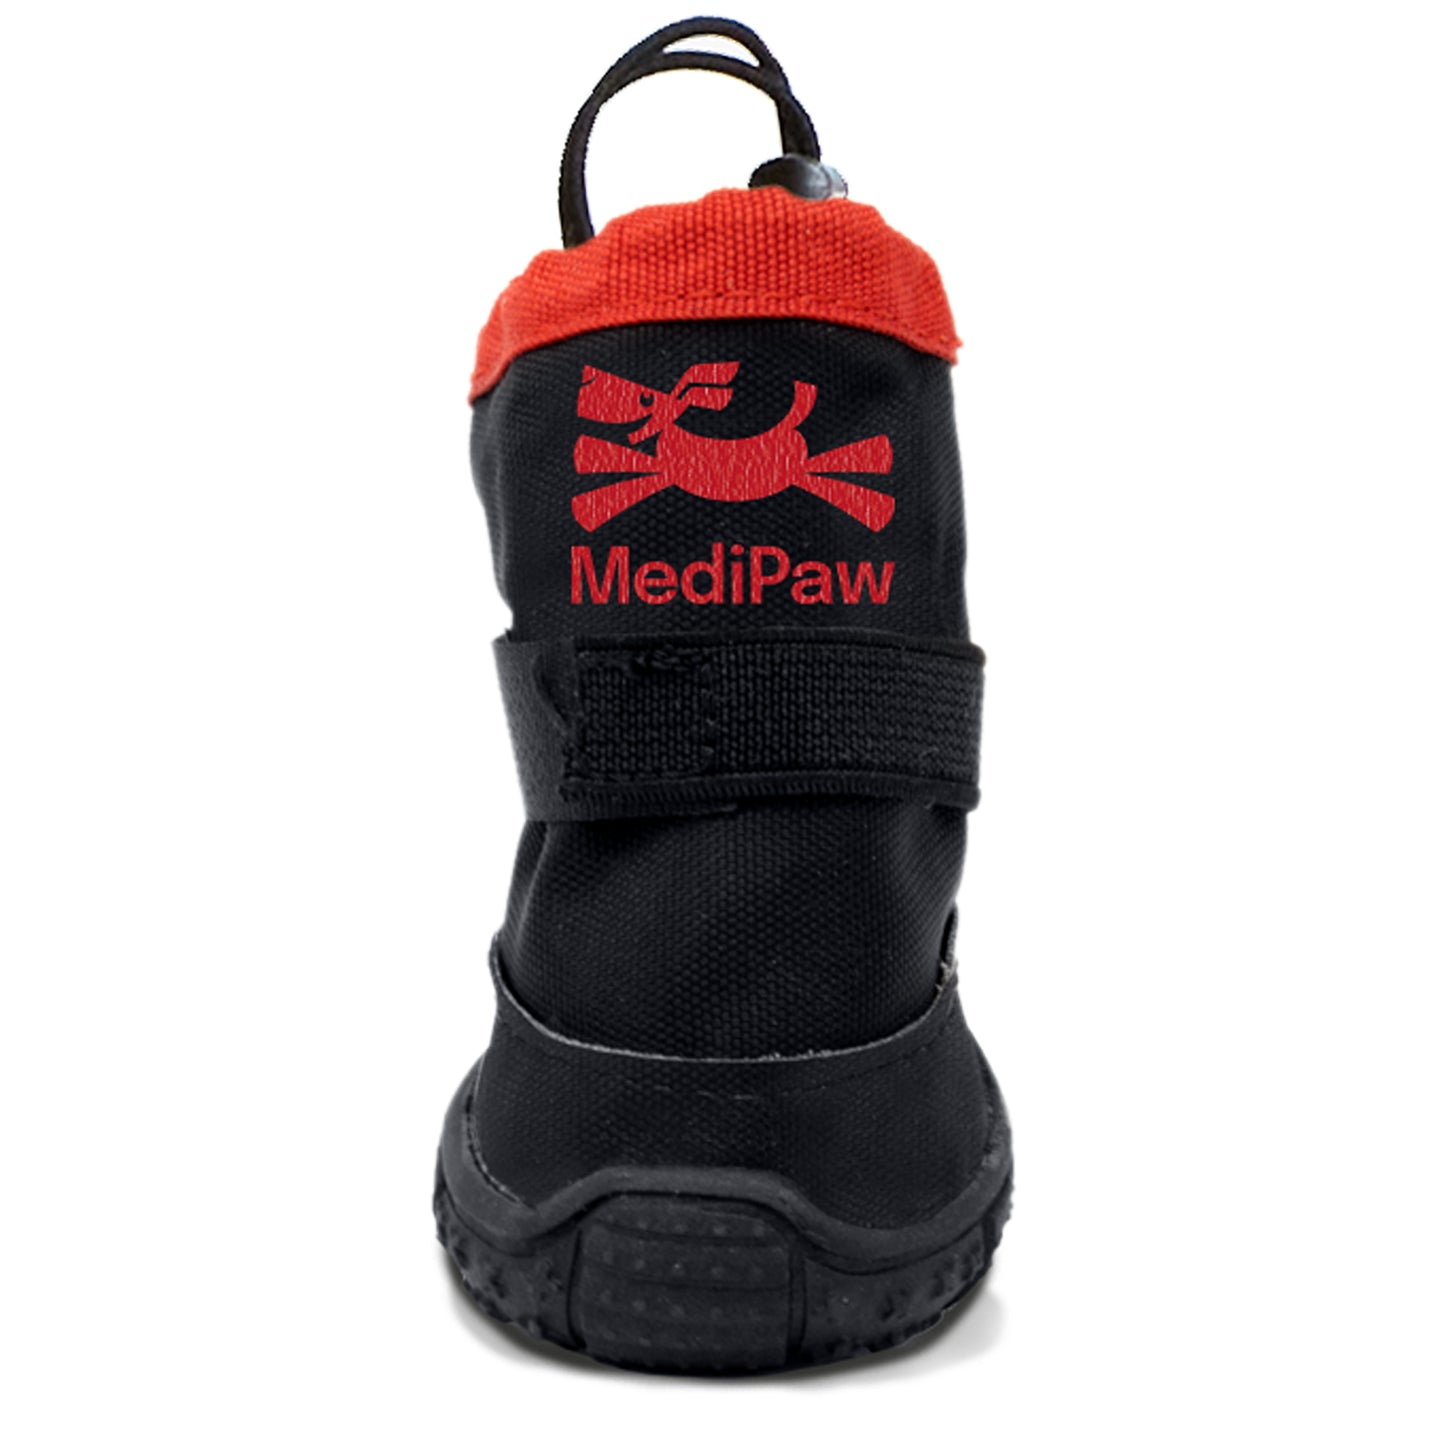 Your Whole Dog's MediPaw: Rugged X-Boot, also known as MediPaw items, are high-quality boots designed to protect your furry friend's paws. Made with durable materials, these boots provide excellent traction and prevent